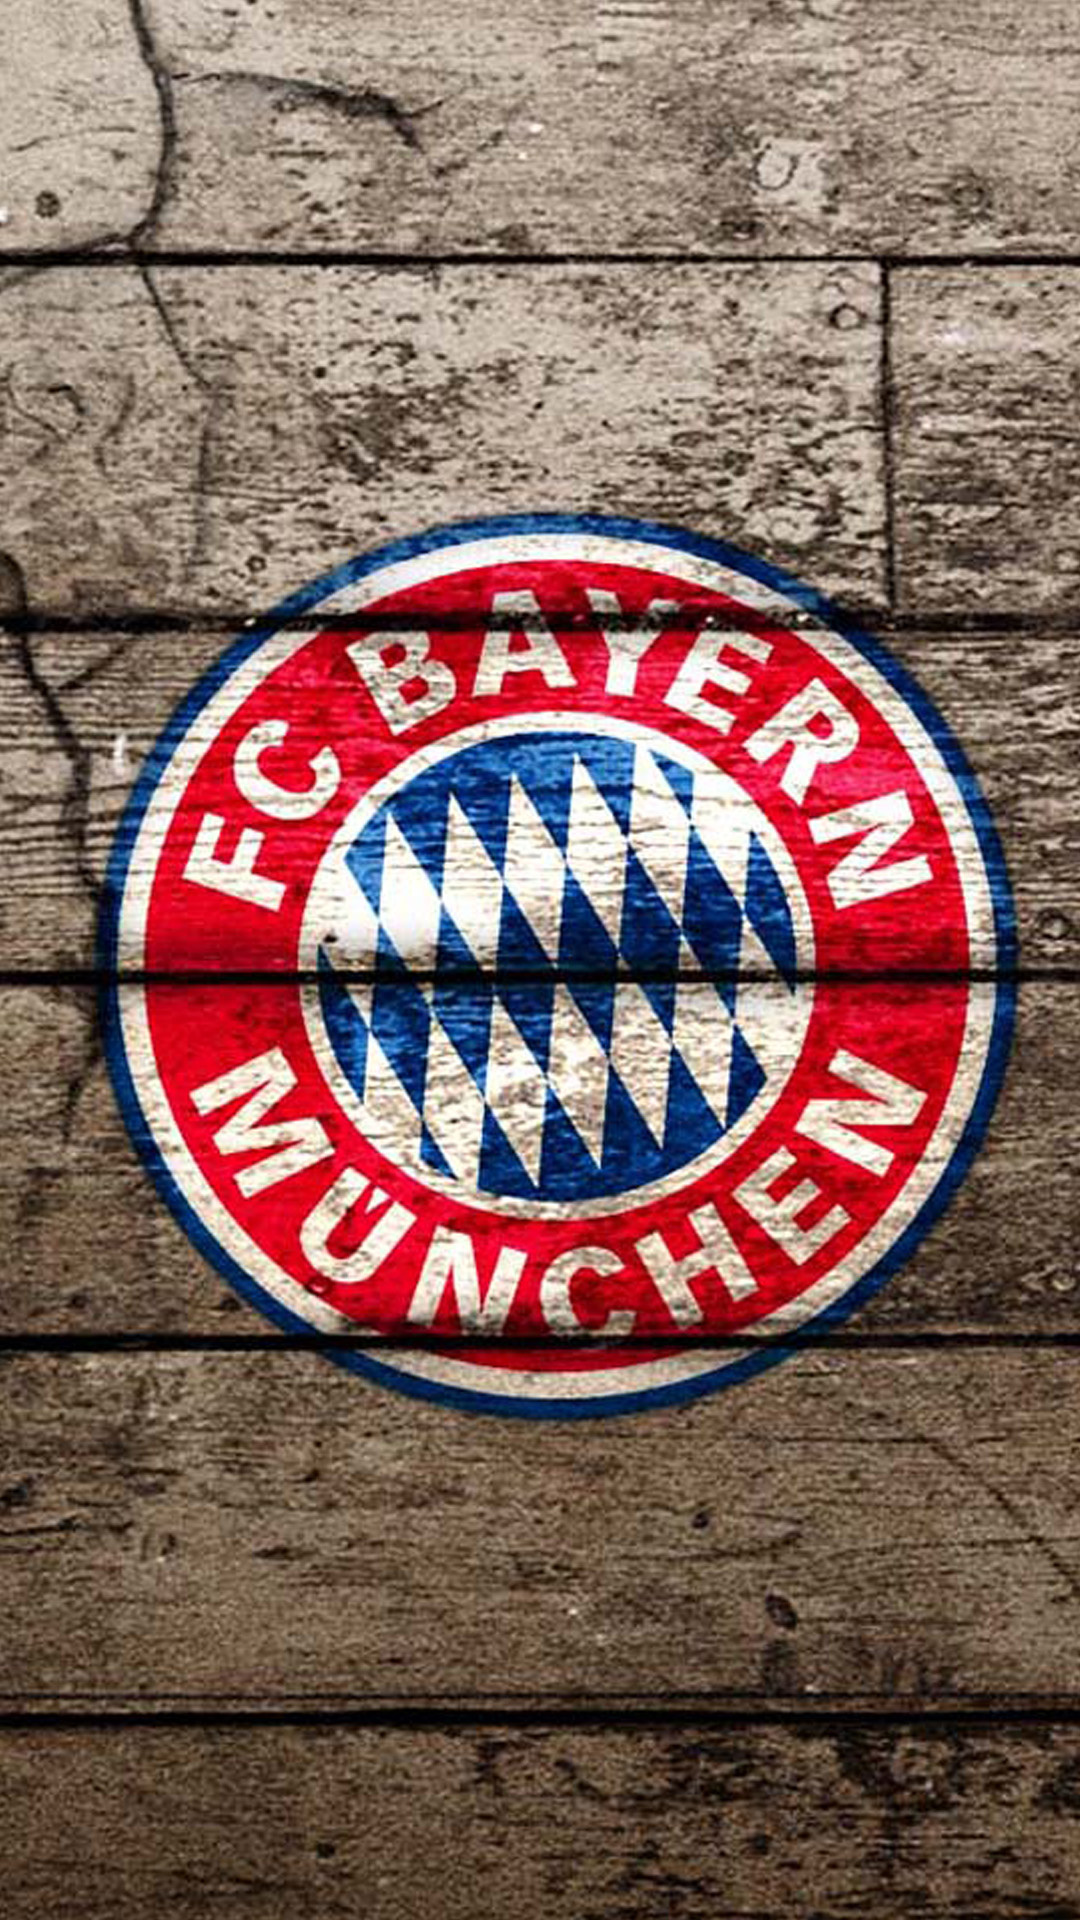 Bayern Munchen FC: Currently in 2nd position in the 2022/23 German Bundesliga, with 46 points from 22 matches played. 1080x1920 Full HD Wallpaper.